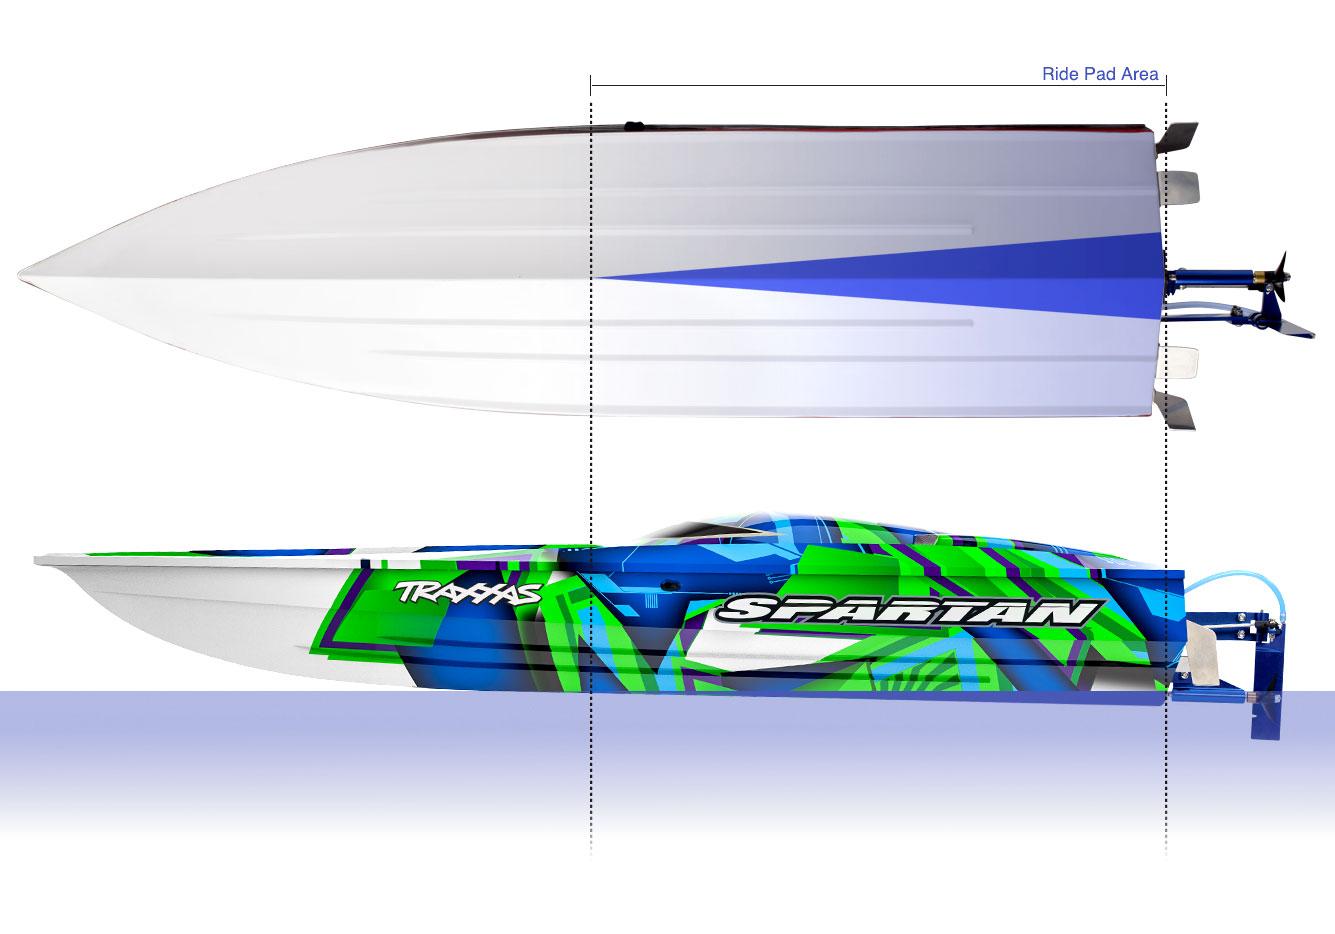 Best Traxxas Rc Boat: High-Speed and Sleek: Discovering the Traxxas Spartan RC Boat